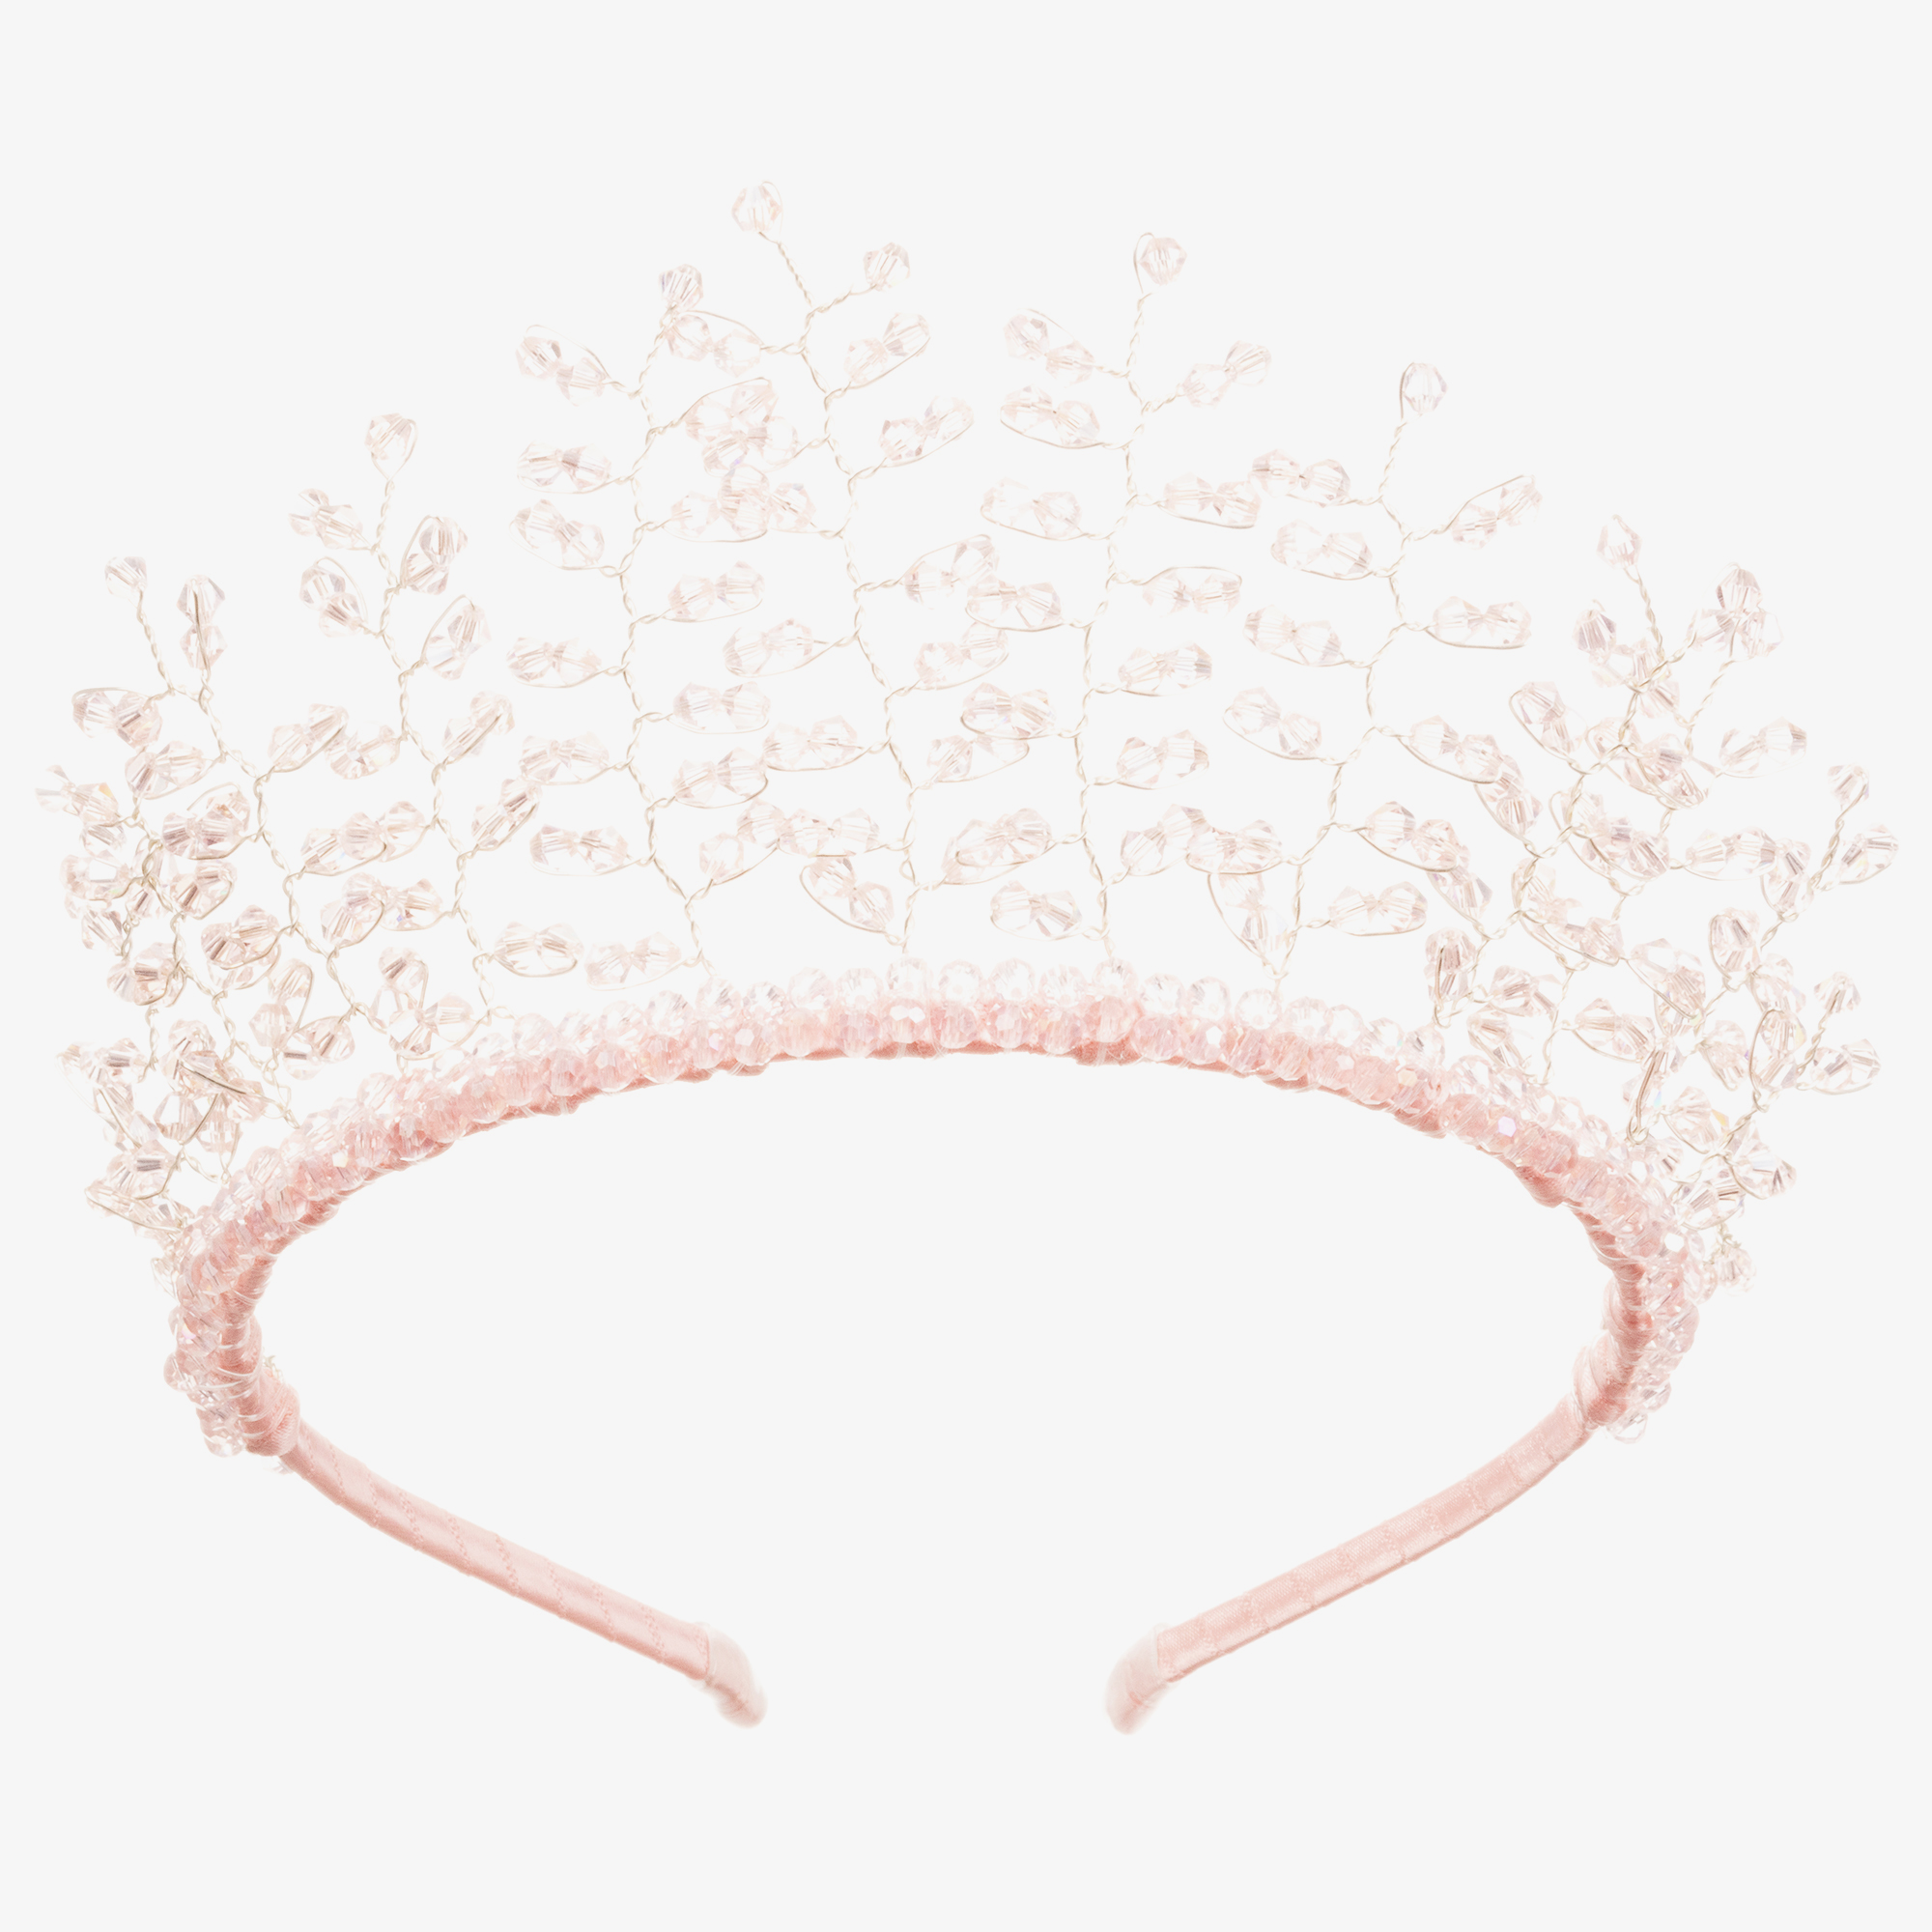 Sienna Likes To Party - Pink Crystal Tiara Hairband